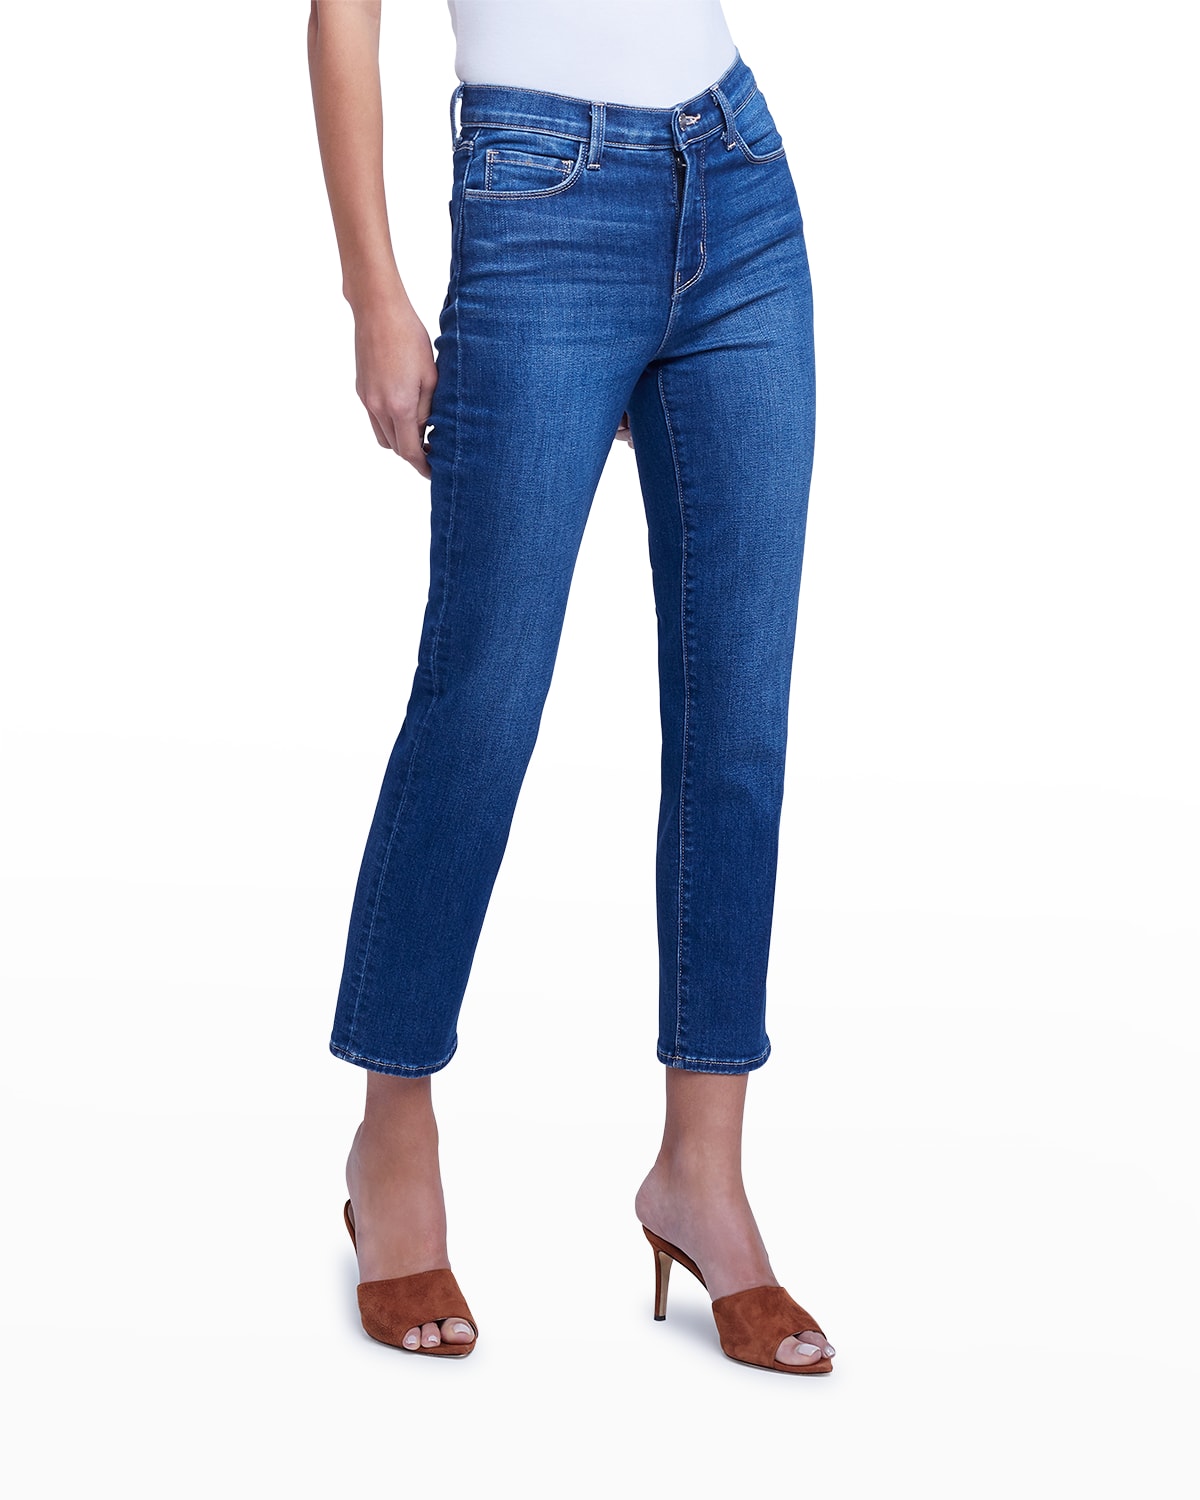 L'Agence The Alexia High-Rise Cigarette Jeans